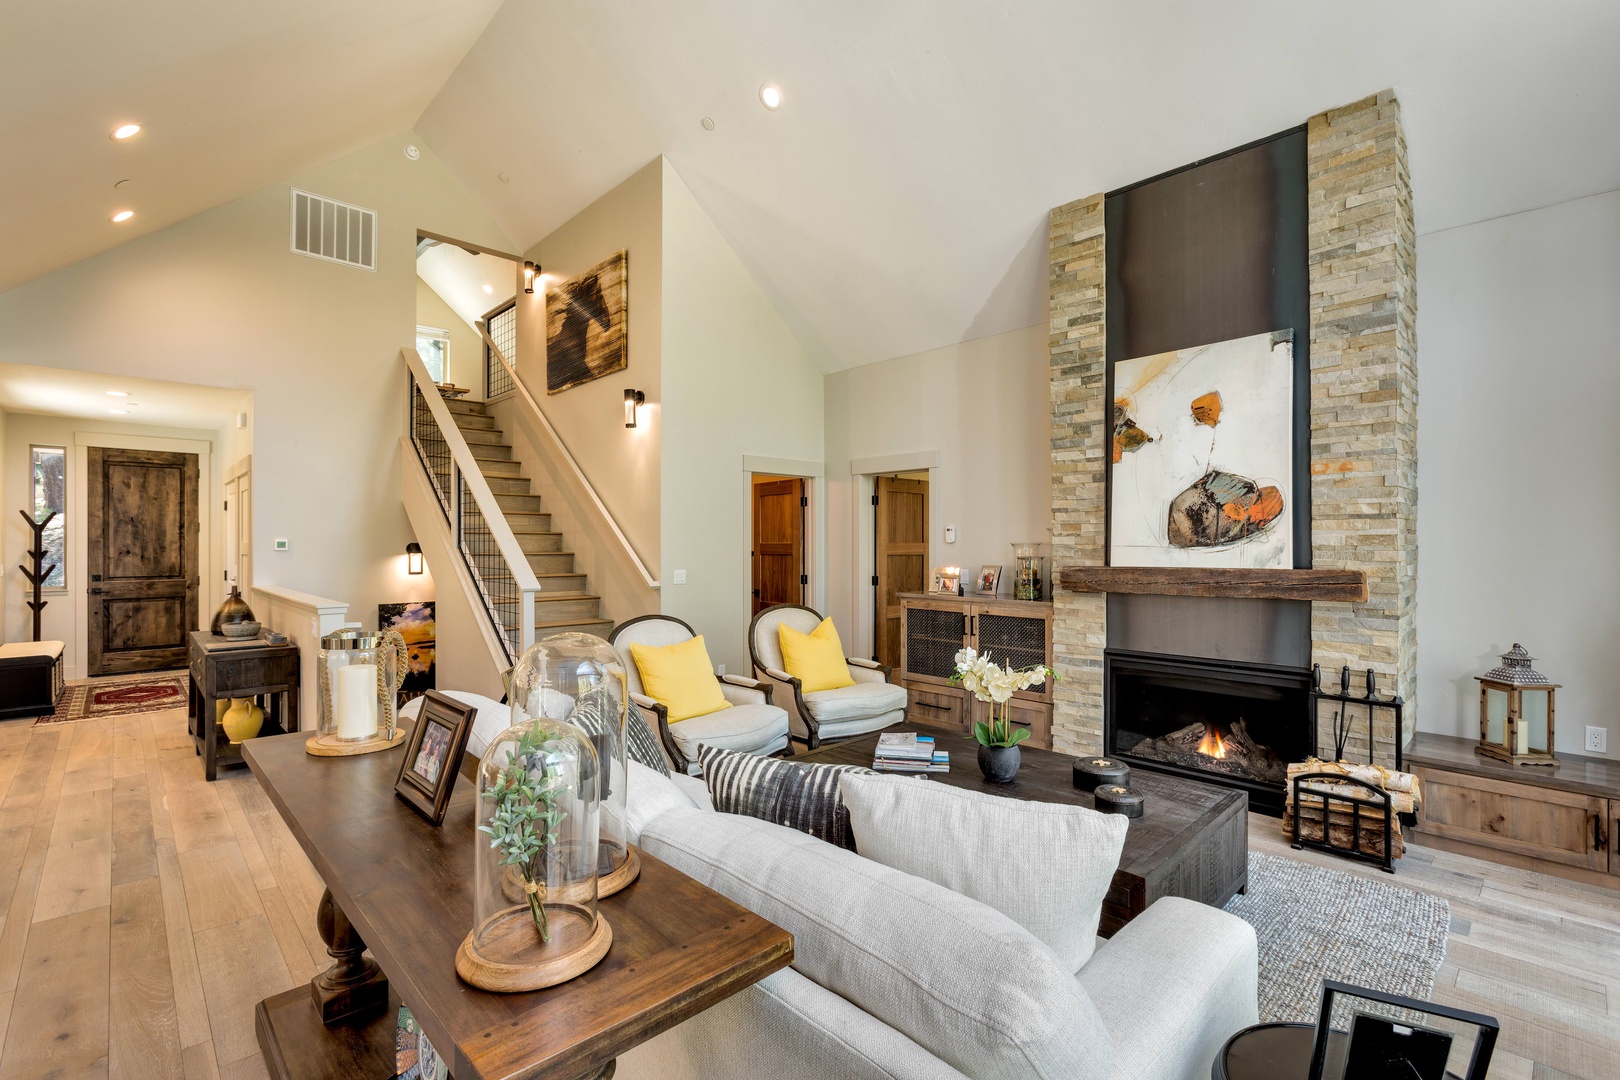 Living room with floor to ceiling windows, gas fireplace, and comfortable seating